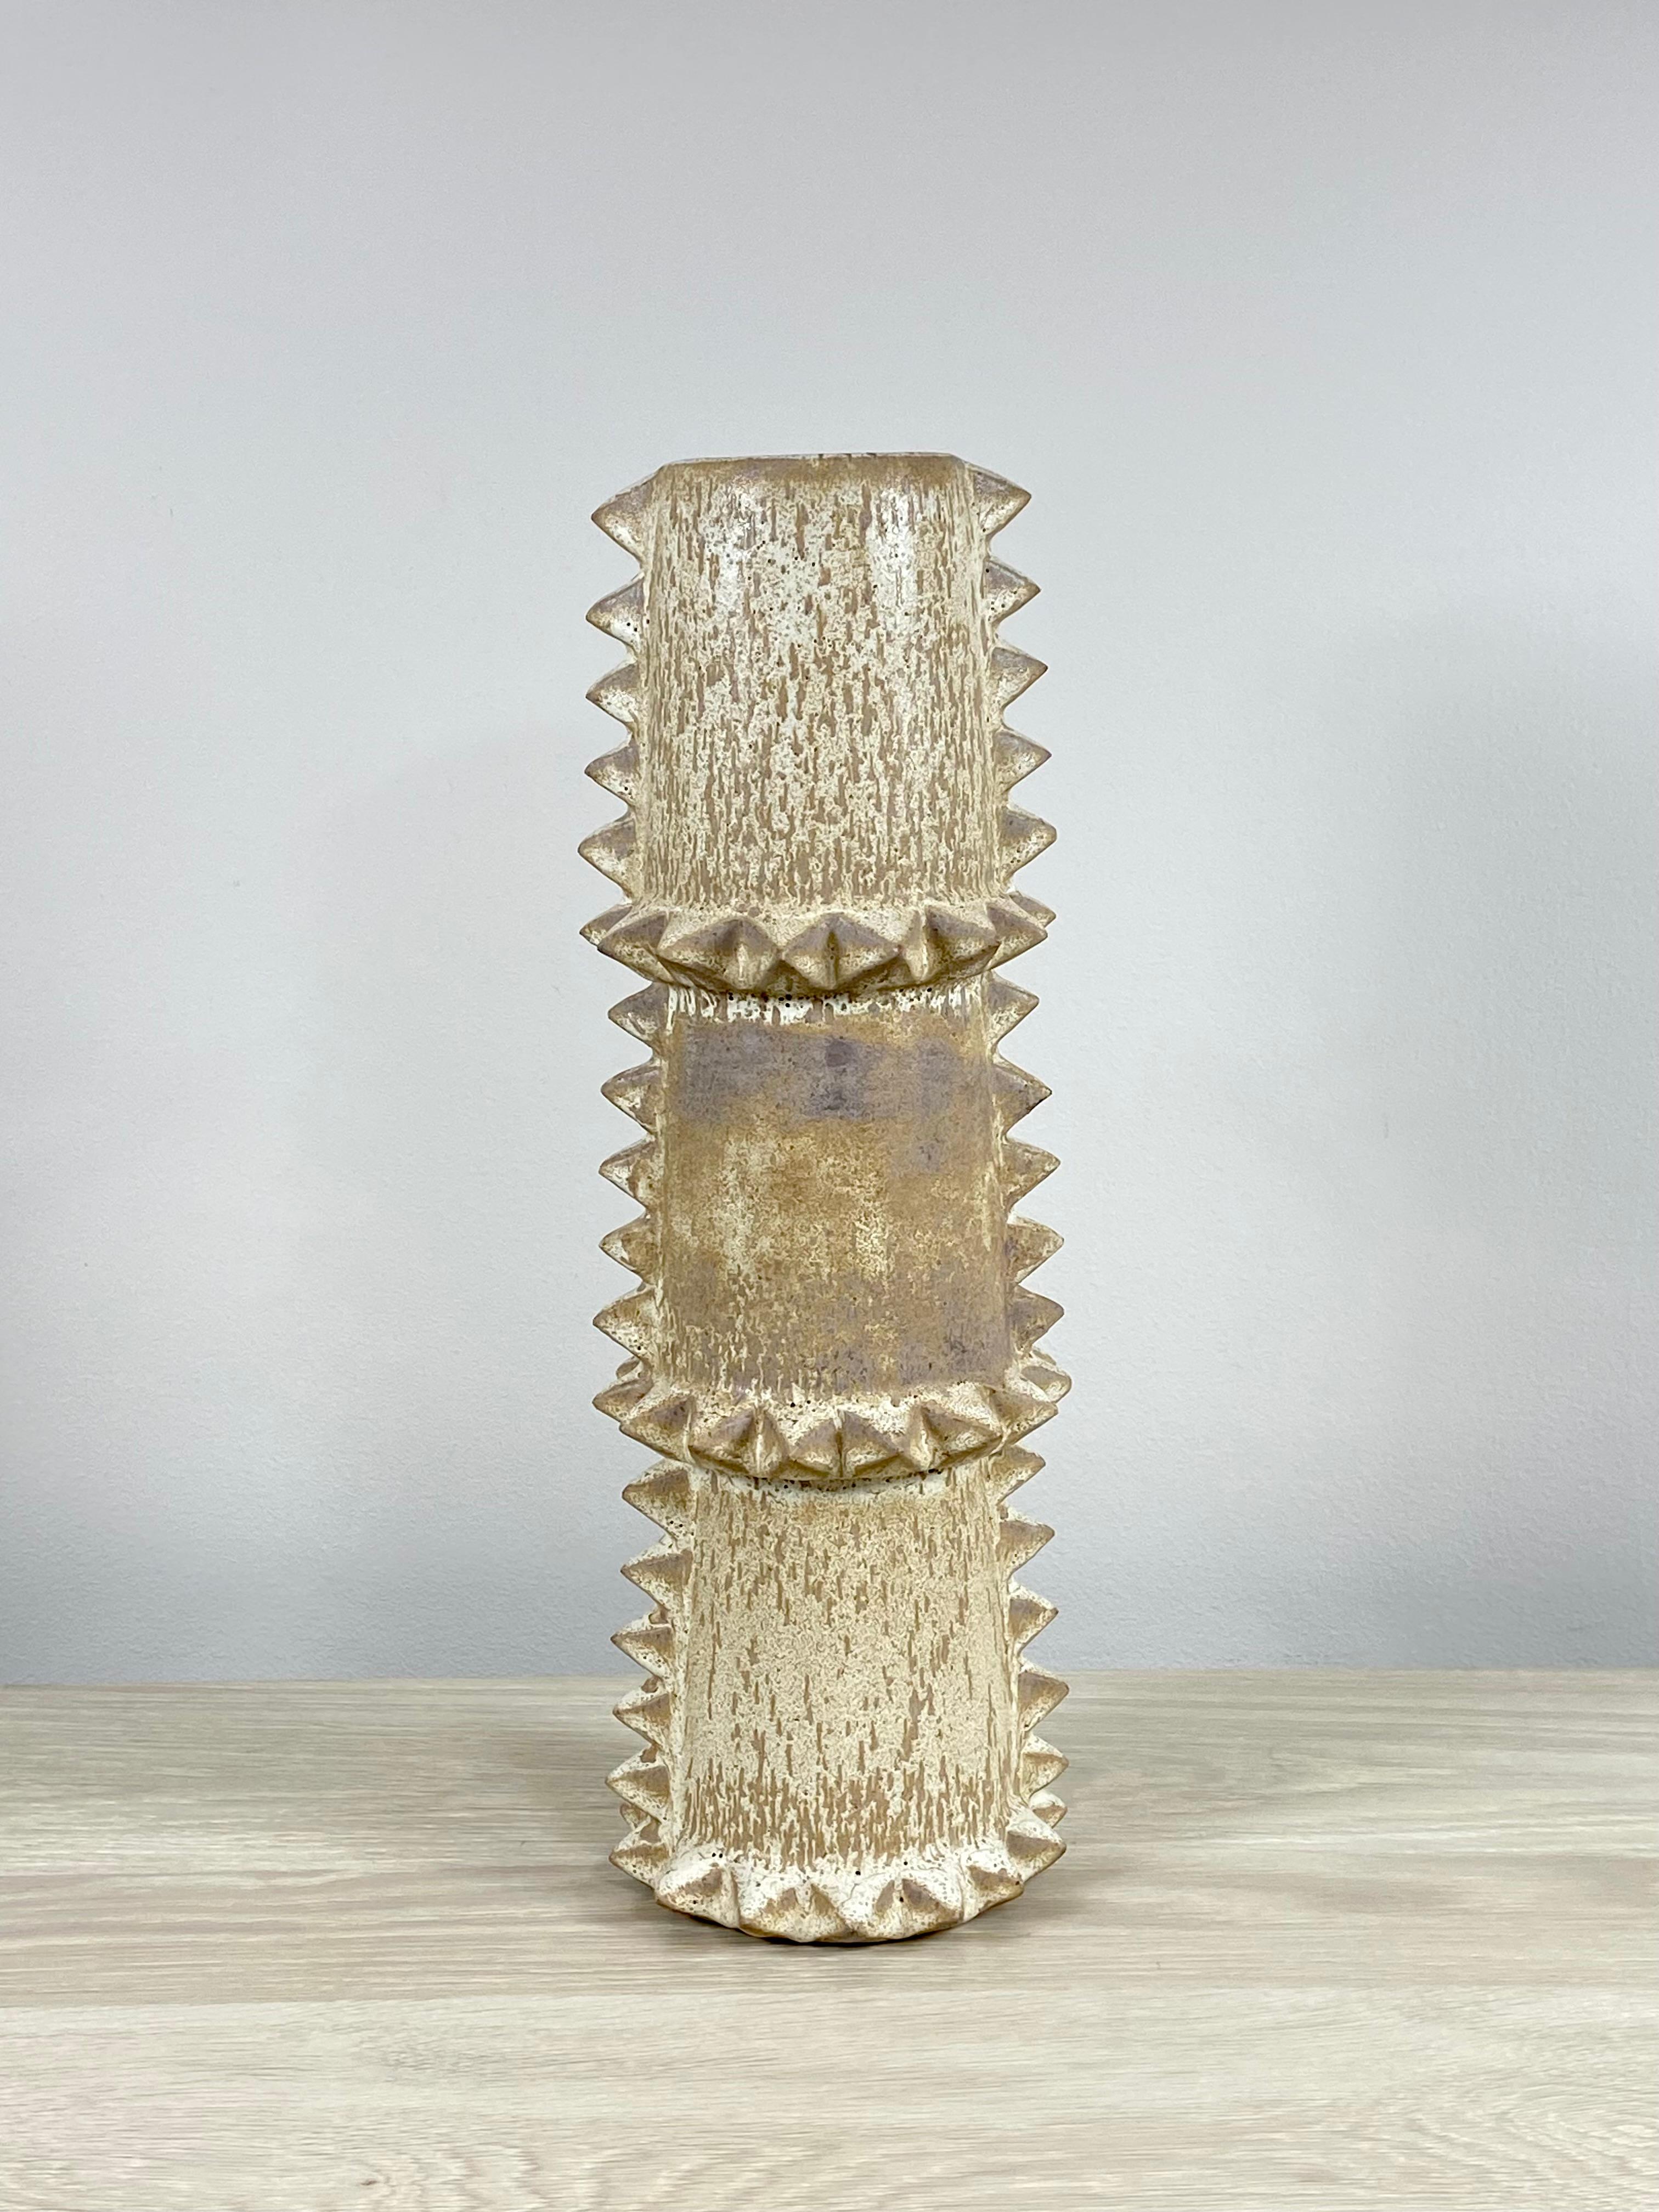 Tall Spiky Ceramic Vase By LGS Studio For Sale 2